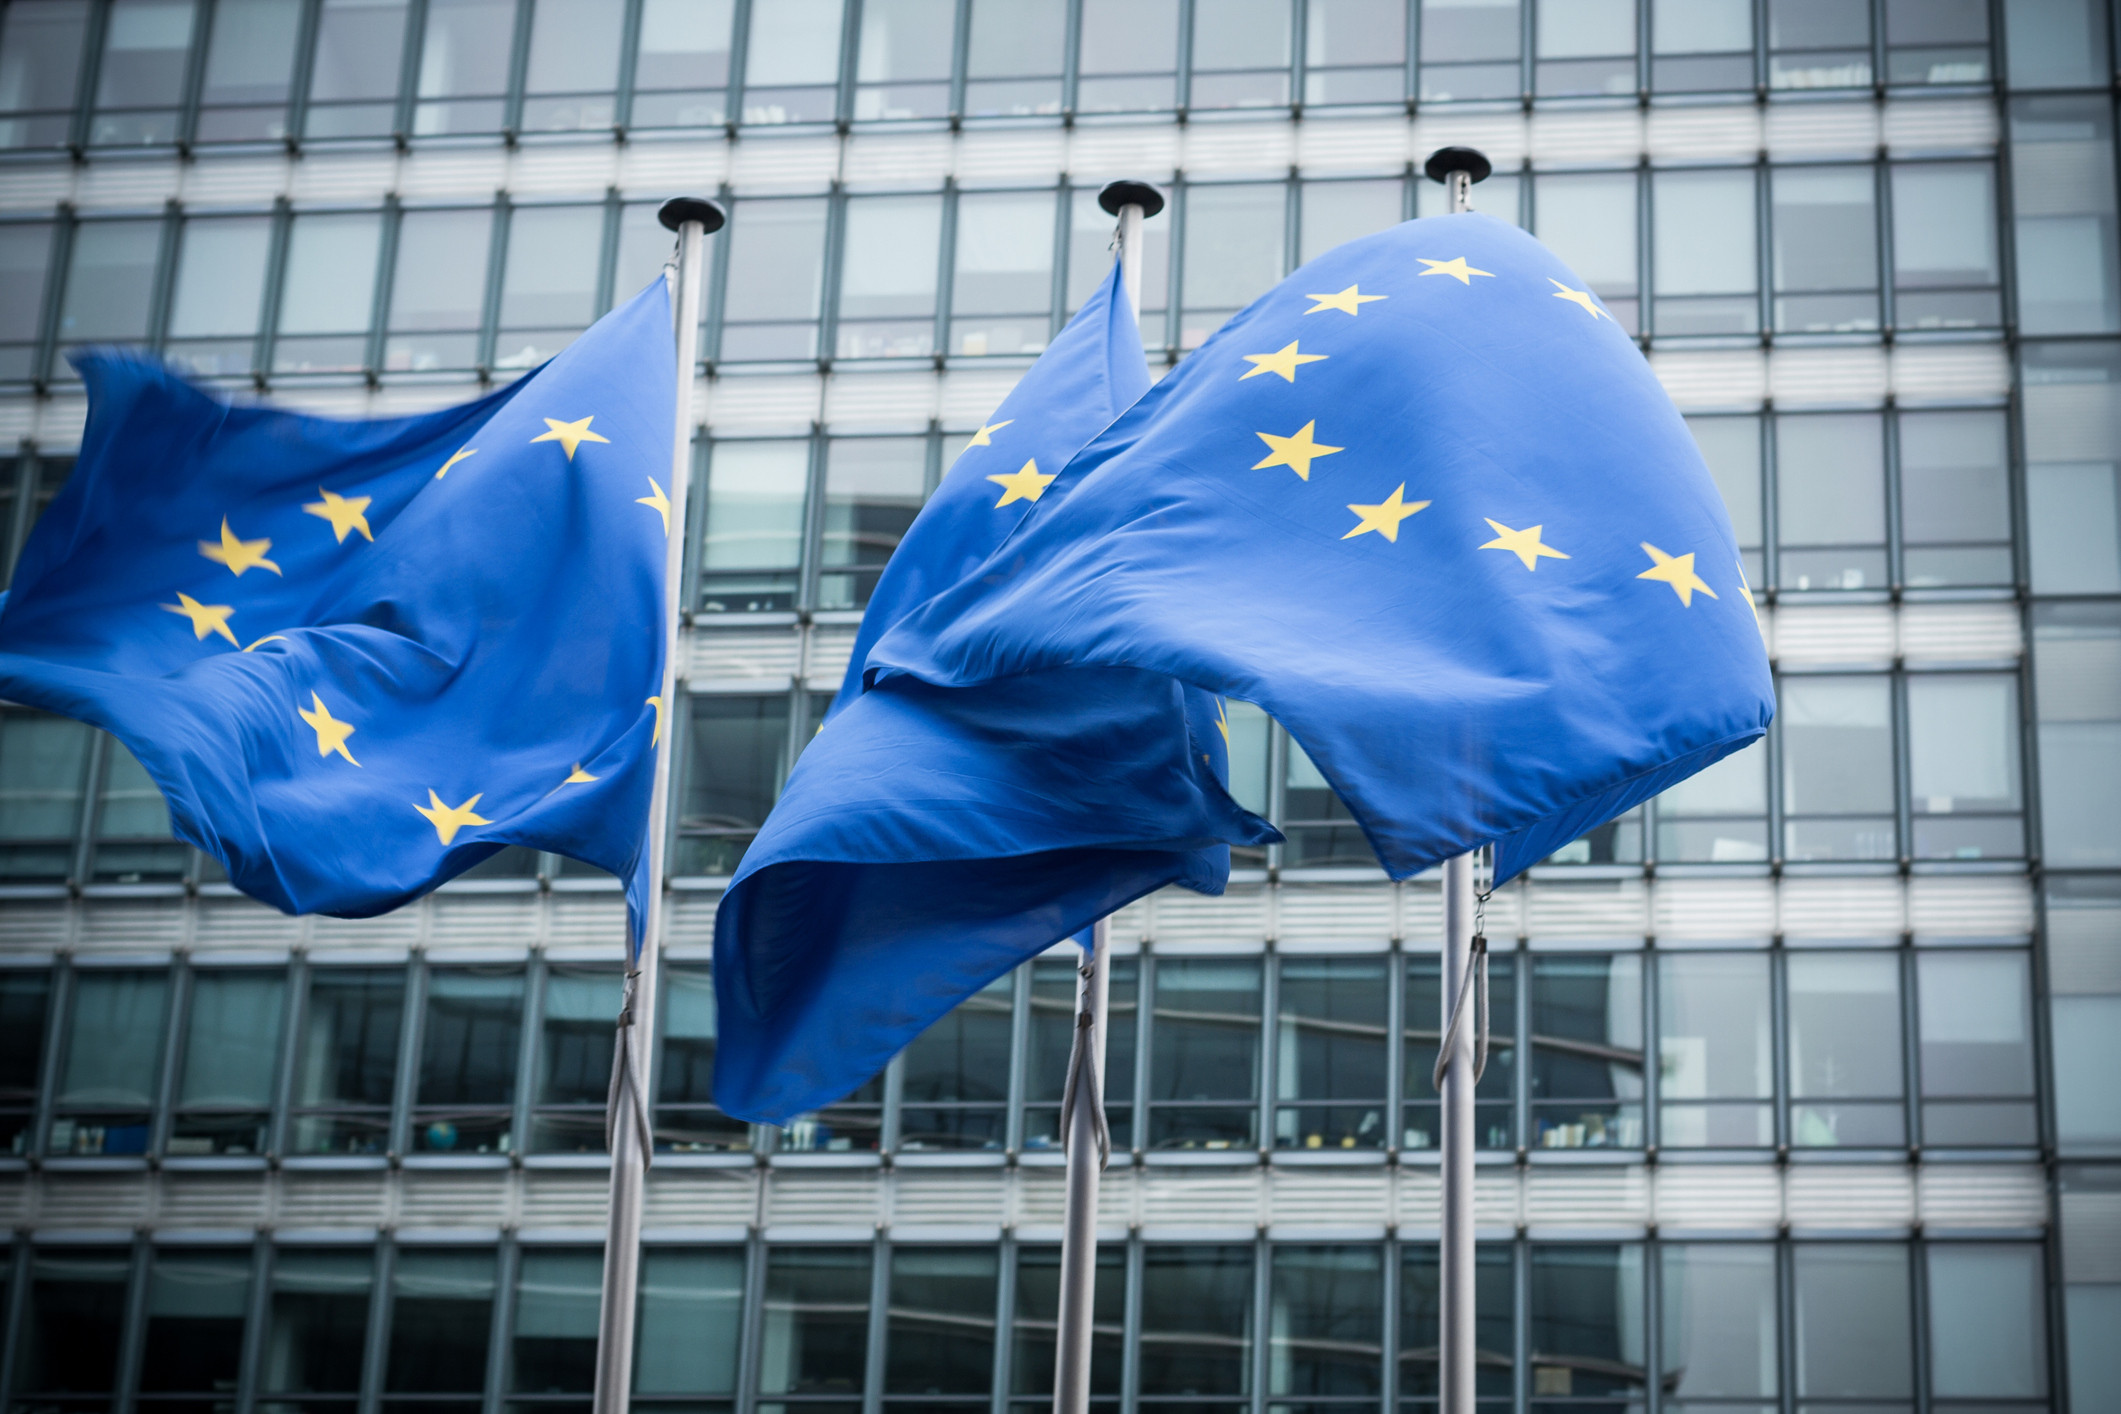 The European Commission publishes pool of individuals eligible for appointment as arbitrators and TSD experts